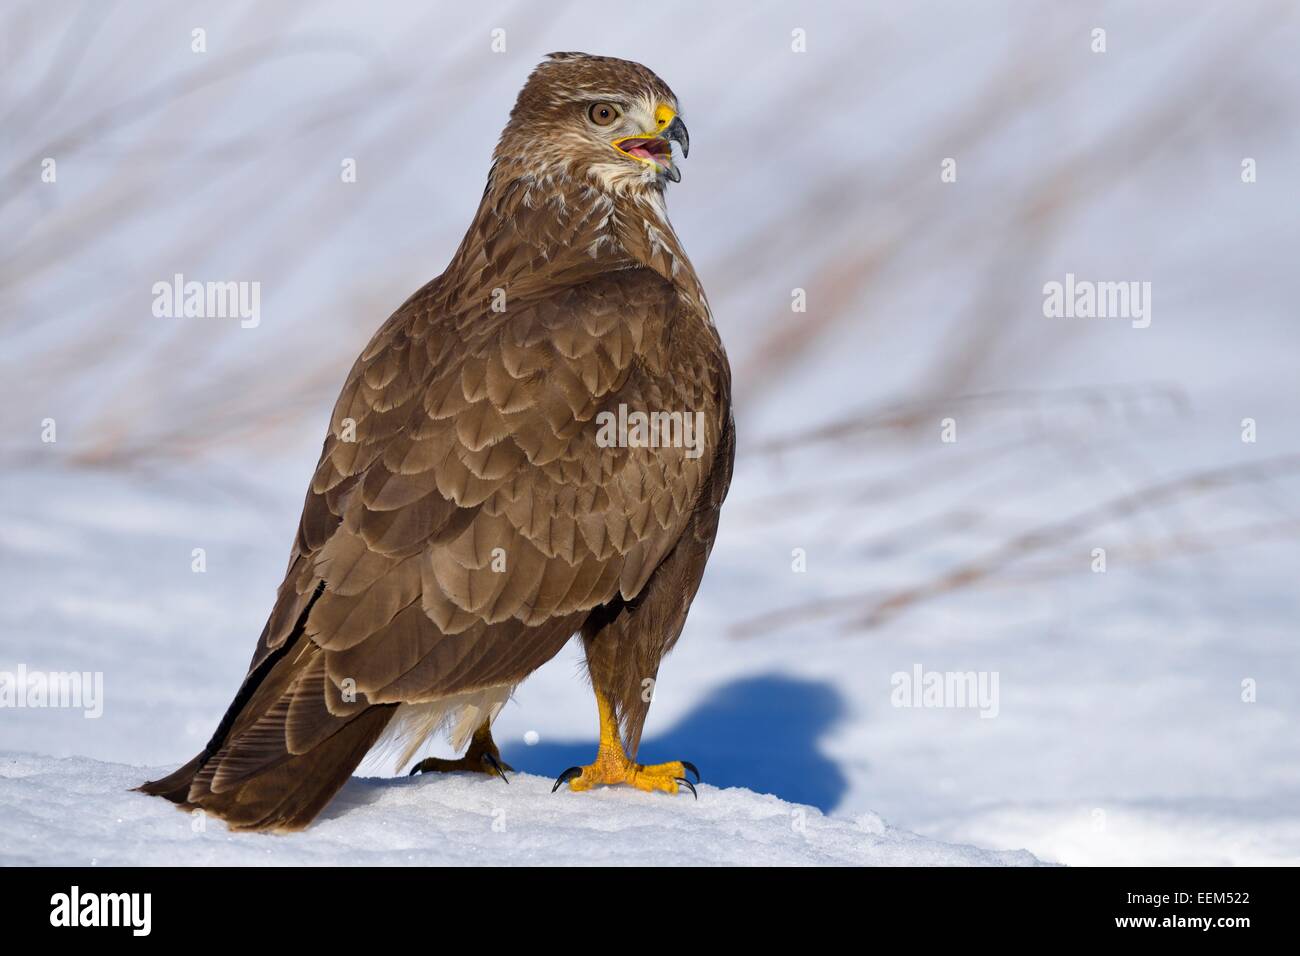 Buzzard (Buteo buteo), perched on snow-covered ground, Swabian Alb Biosphere Reserve, Baden-Württemberg, Germany Stock Photo